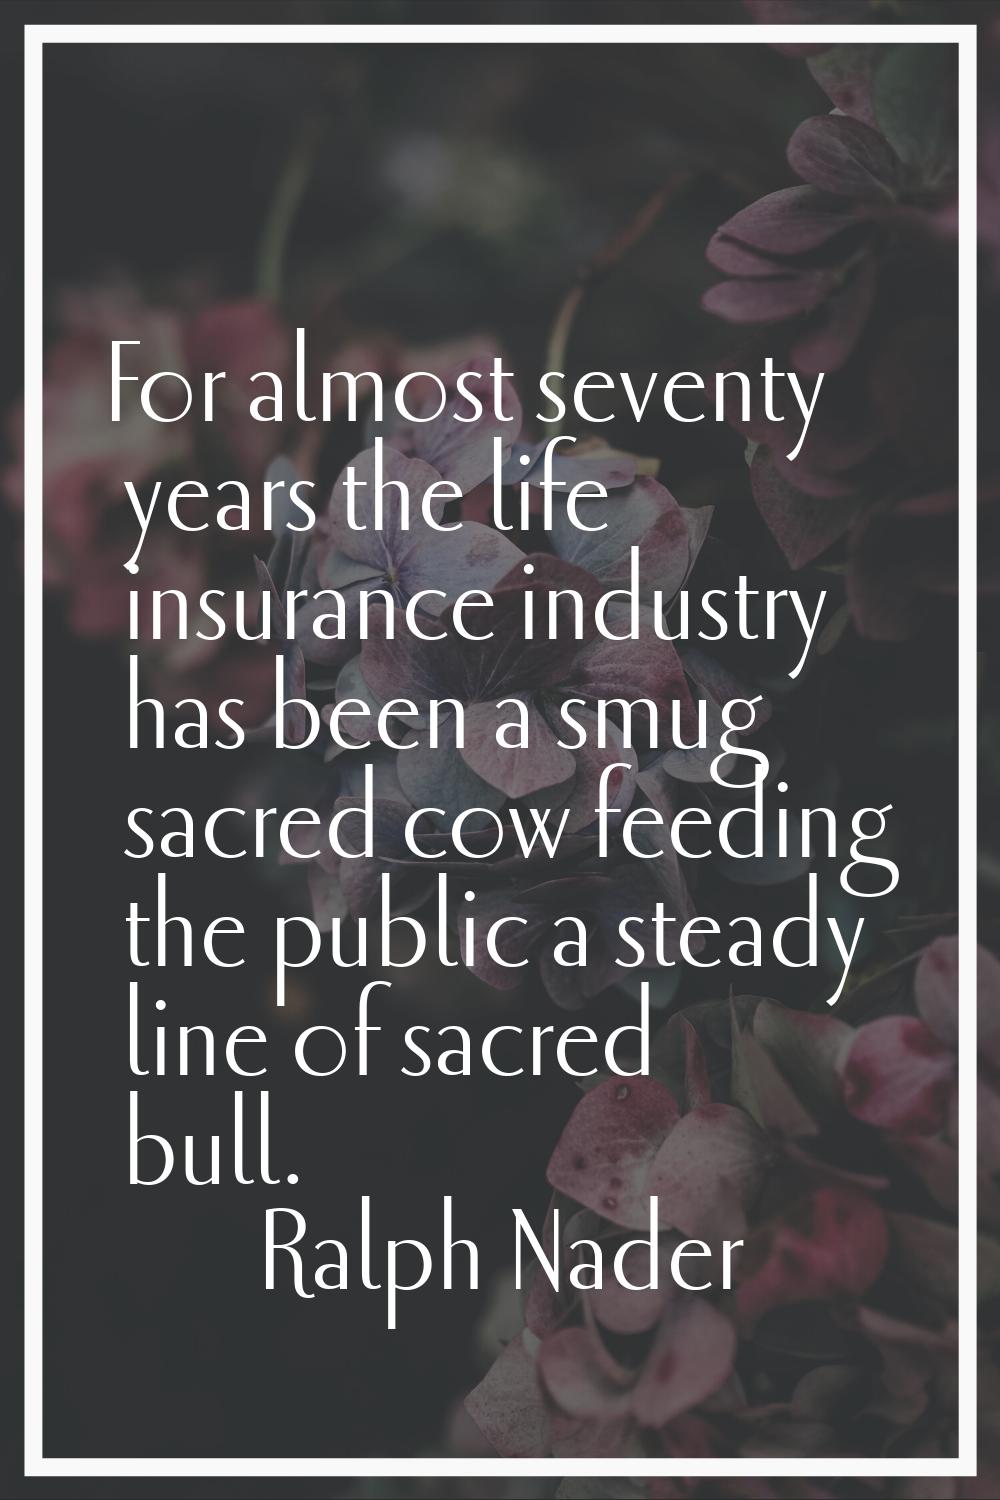 For almost seventy years the life insurance industry has been a smug sacred cow feeding the public 